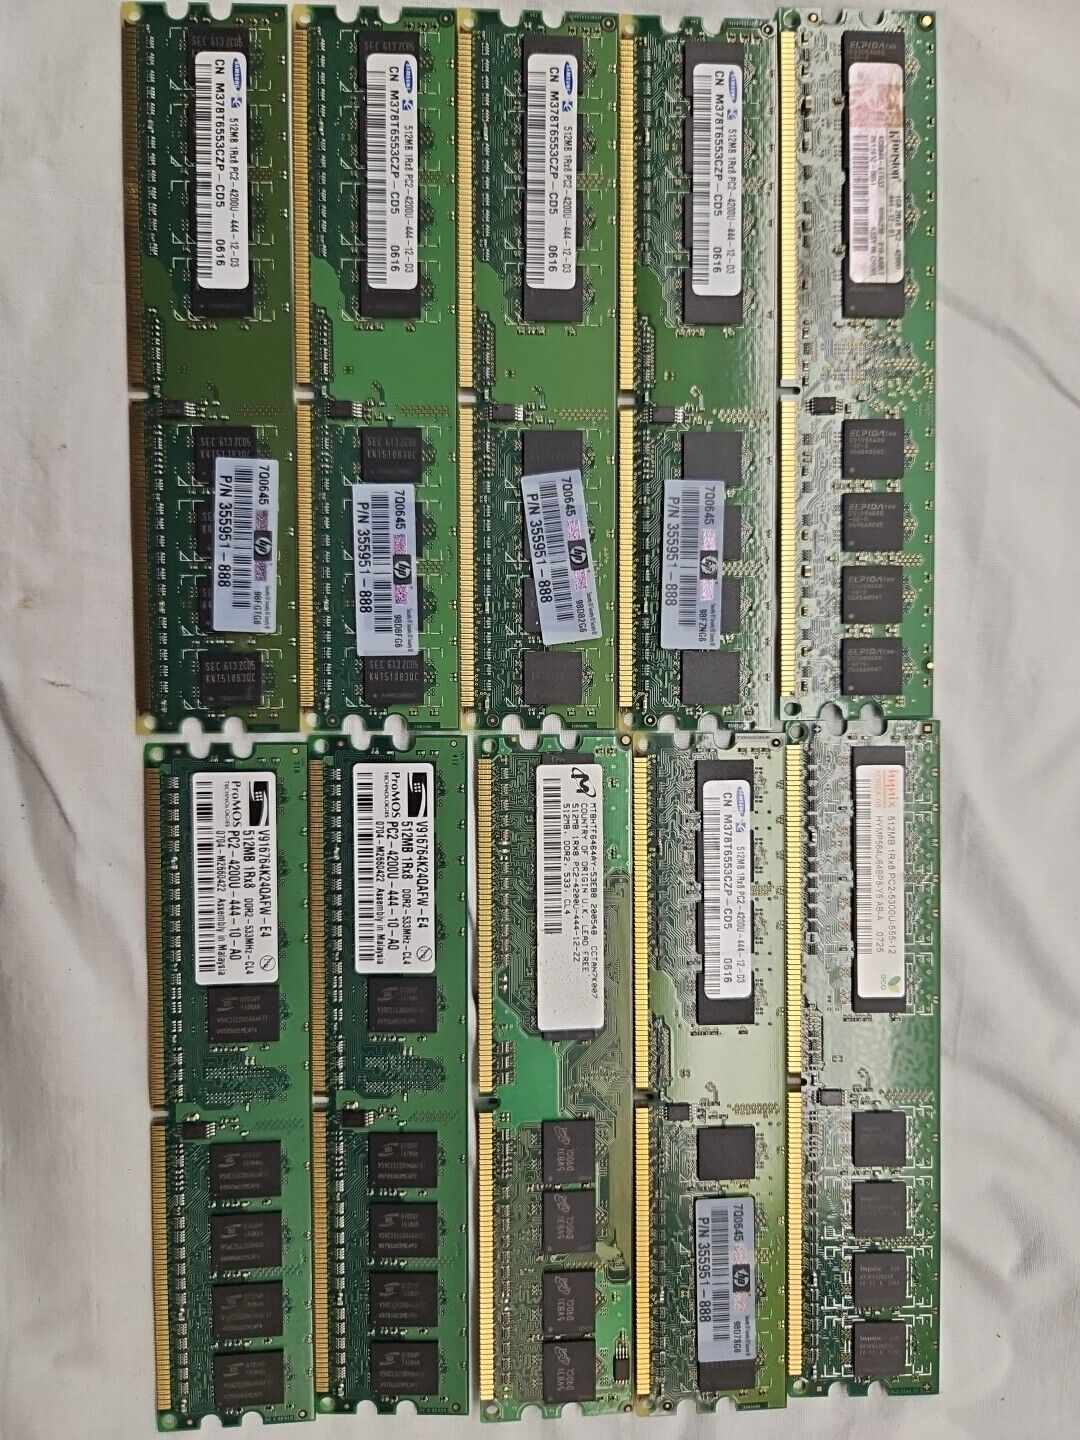 Lot Of 10 Mixed Brand Samsung PC2-4200U 512MB DIMM 533 MHz DDR2 Memory 